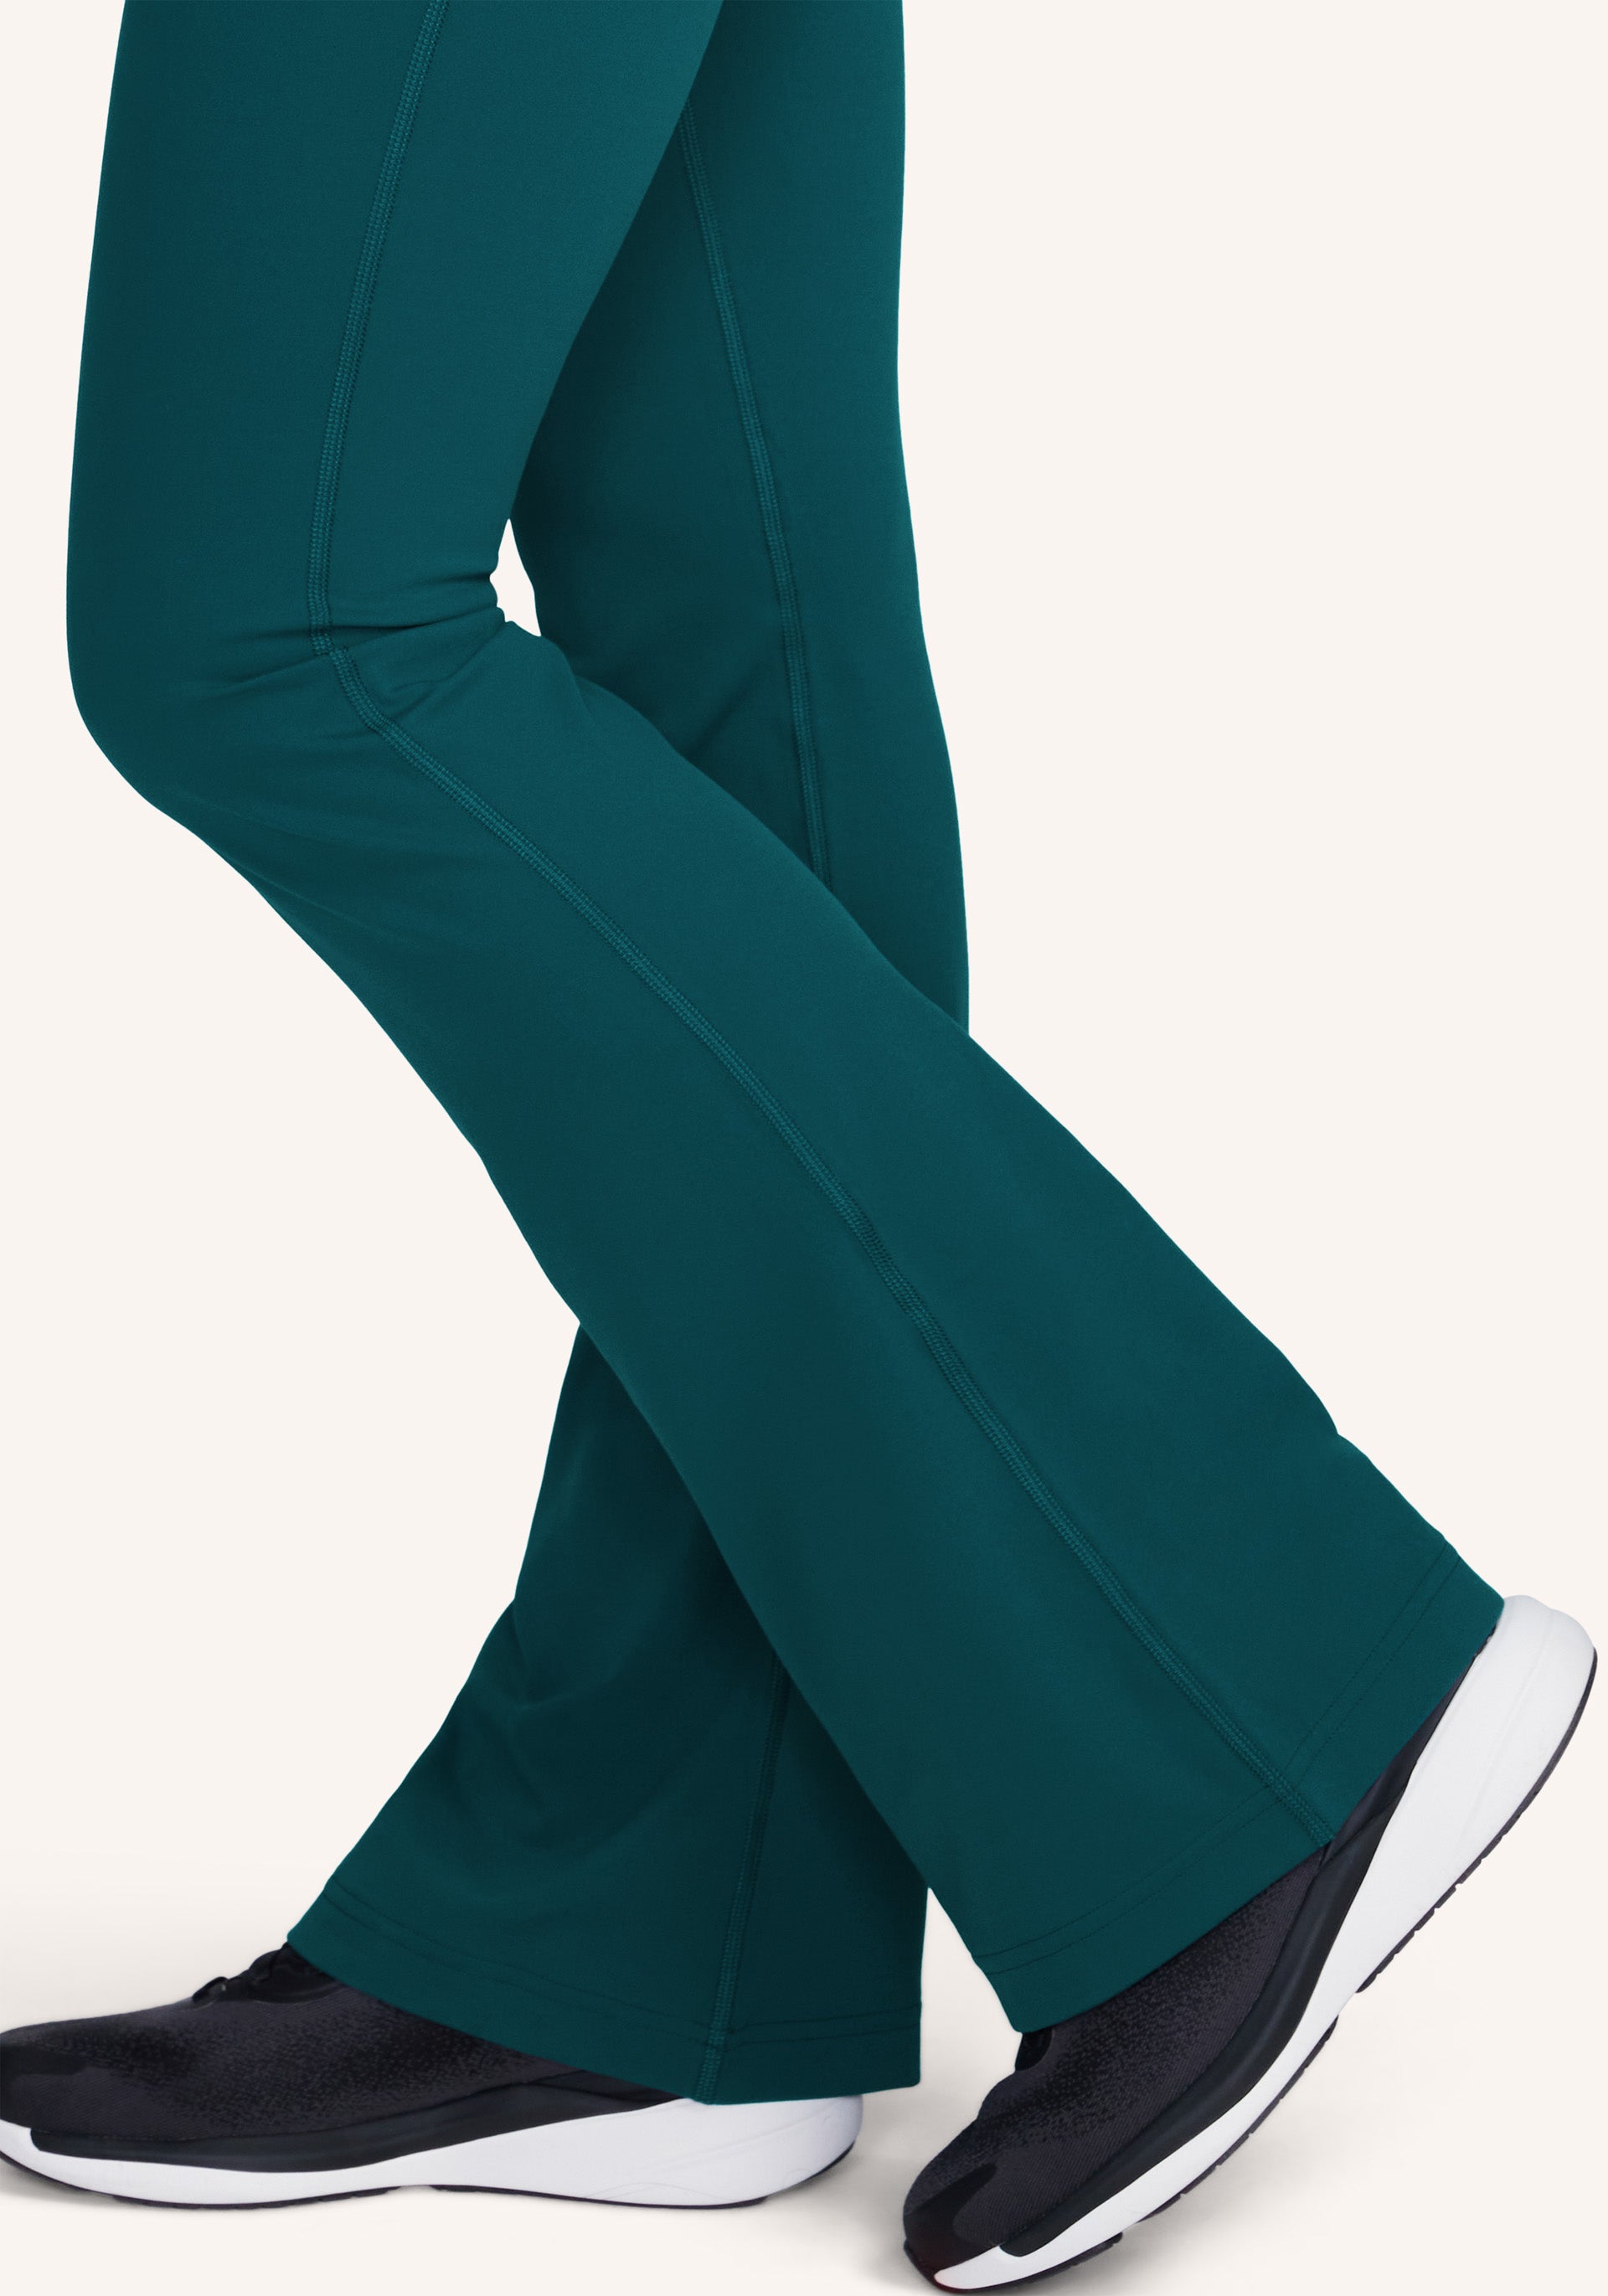 Guys. The groove pants are in stock in size 8. Only in the dark